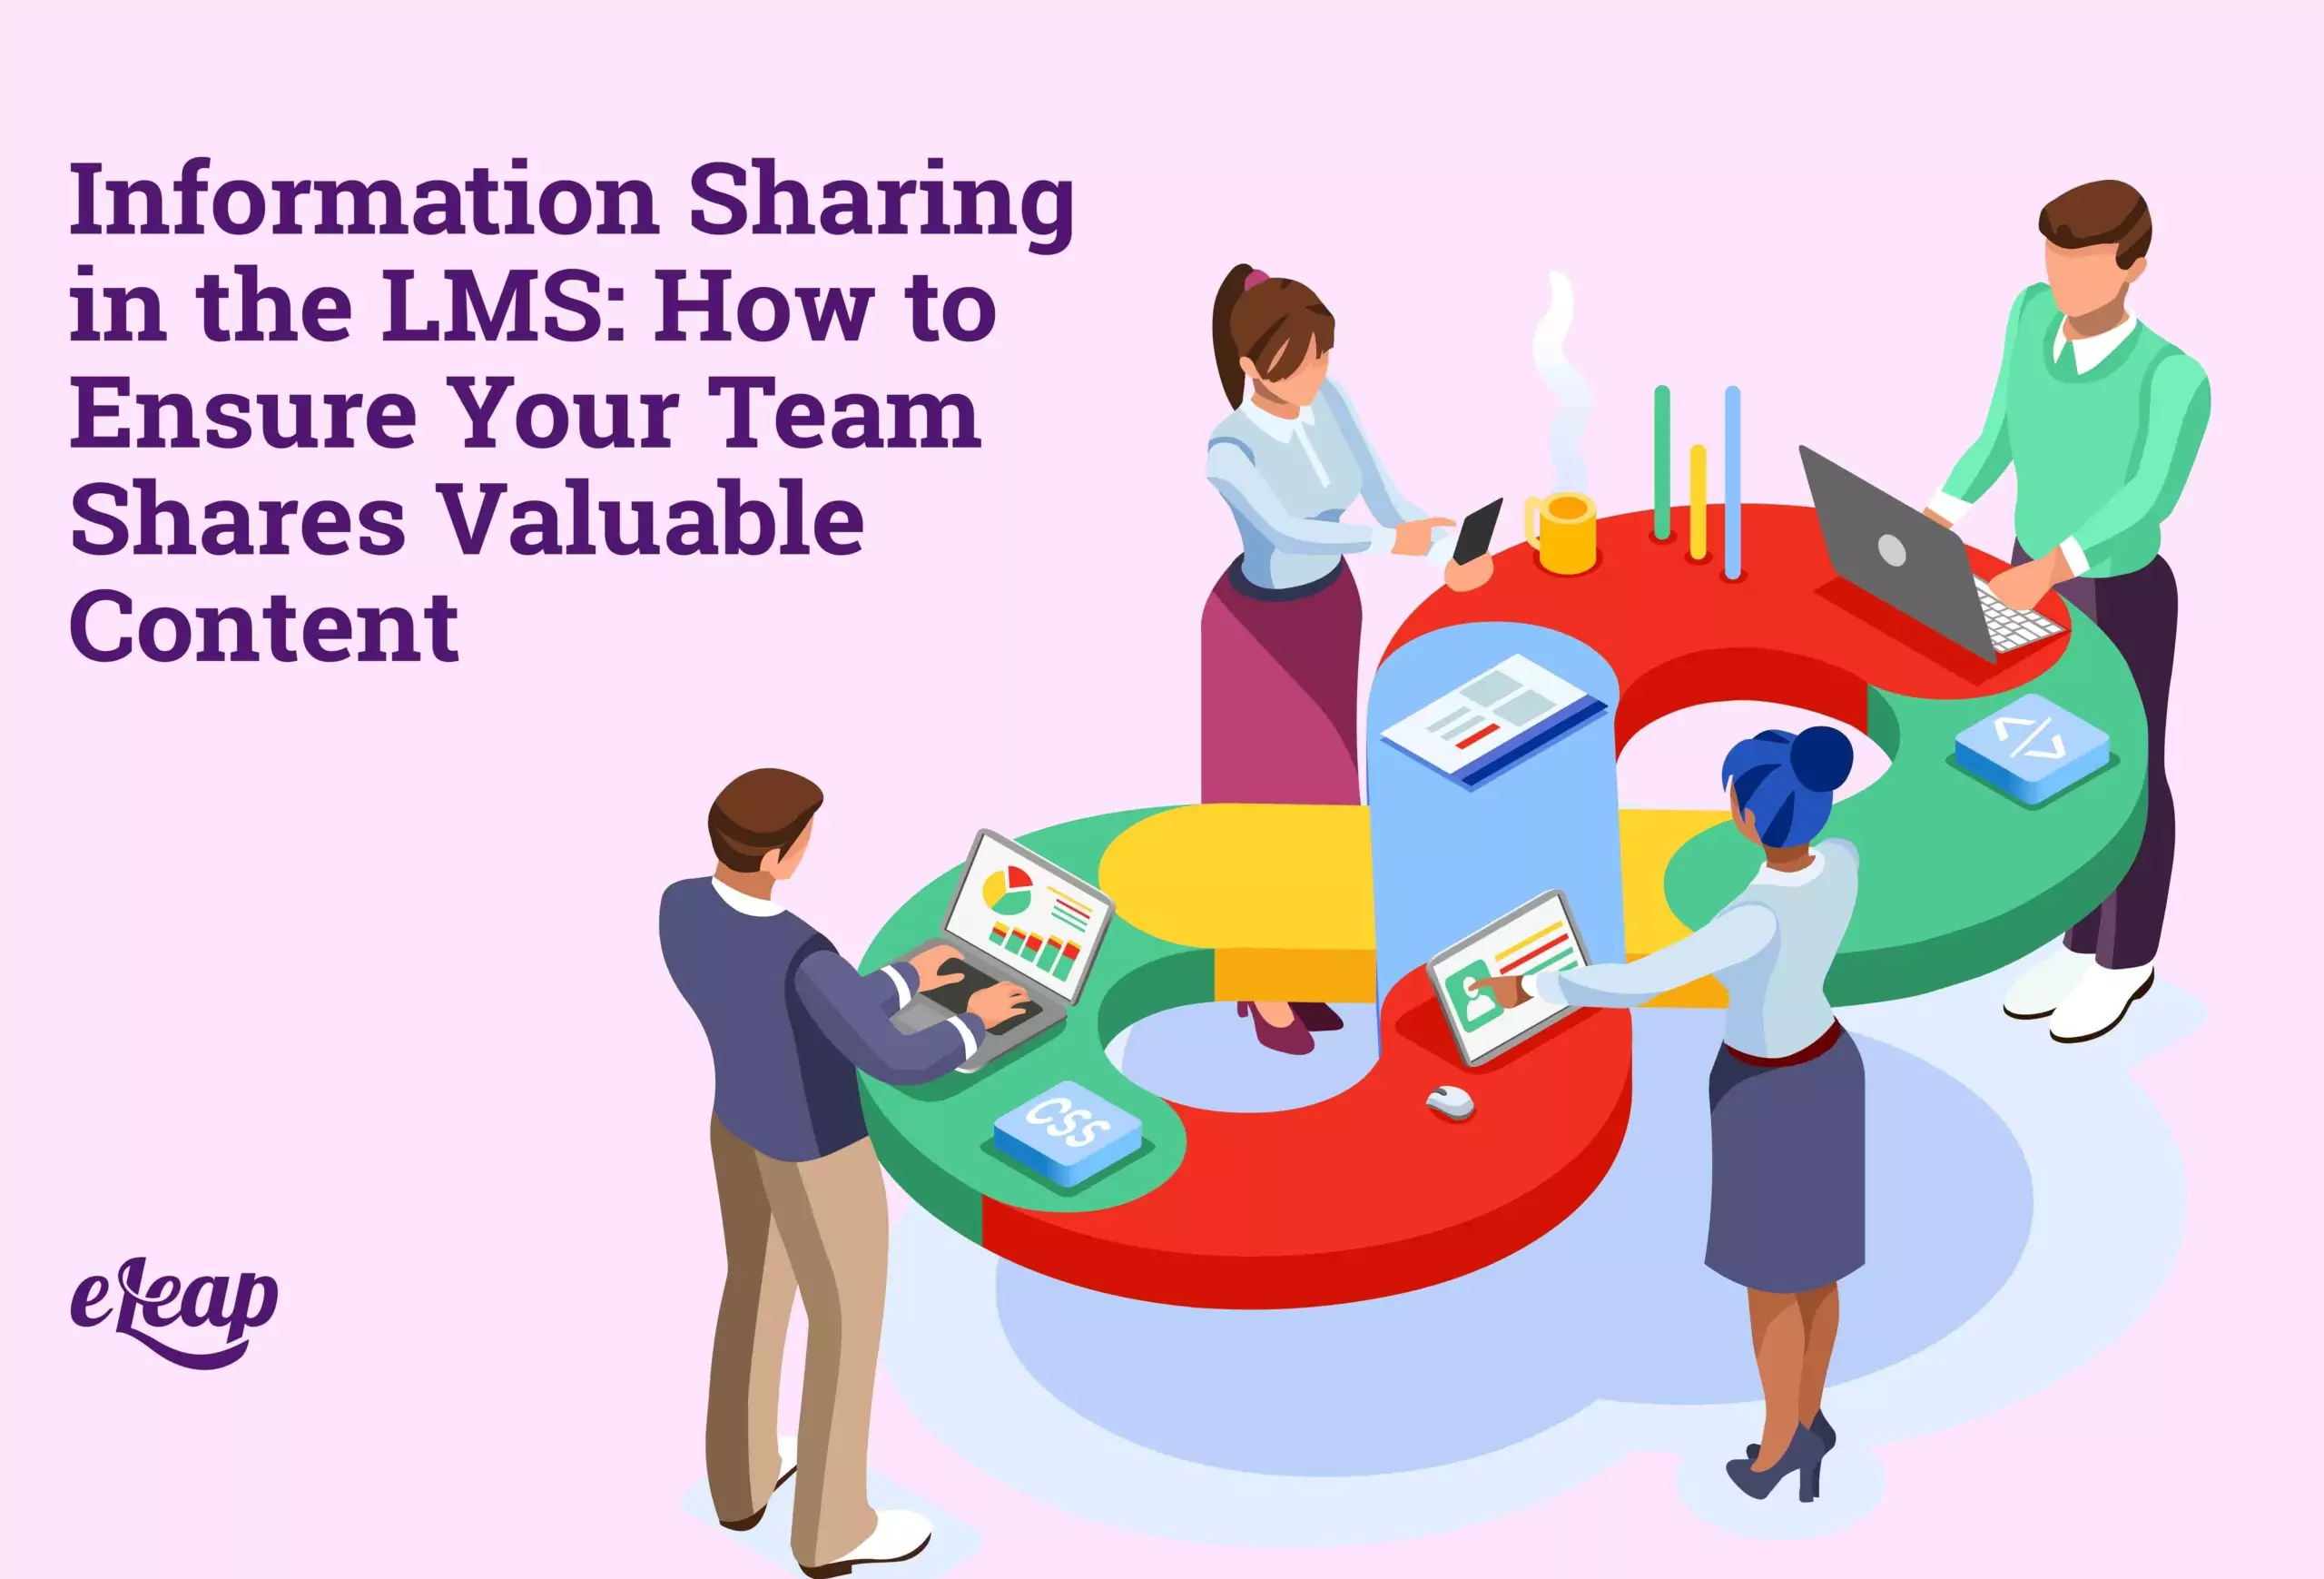 Information Sharing in the LMS: How to Ensure Your Team Shares Valuable Content